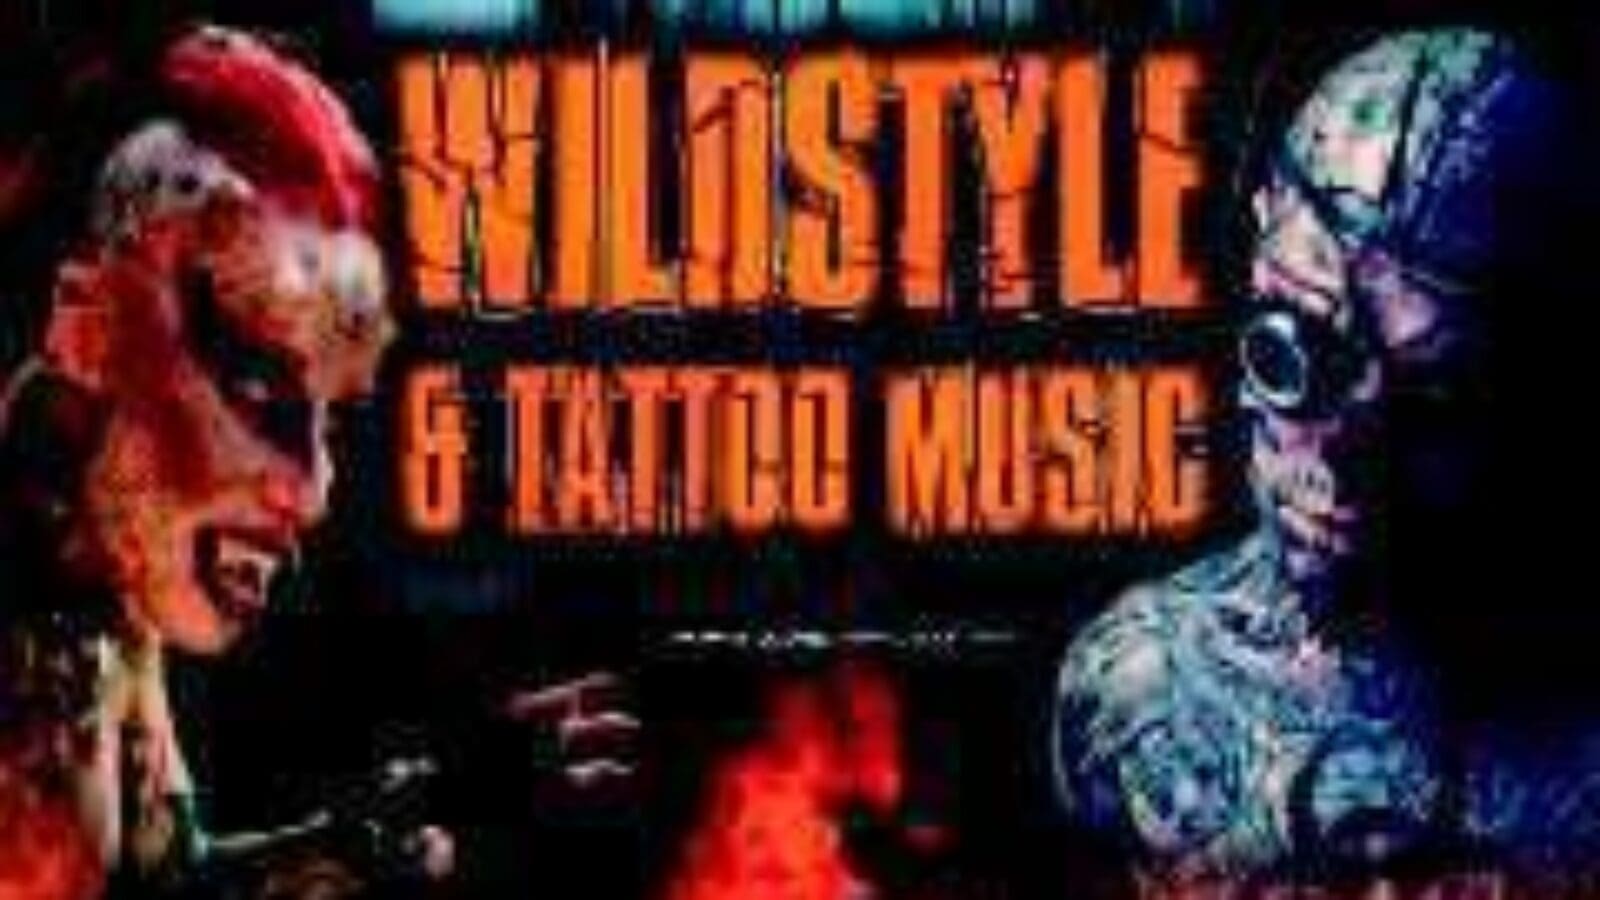 V.A. WILDSTYLE & TATTOO MUSIC